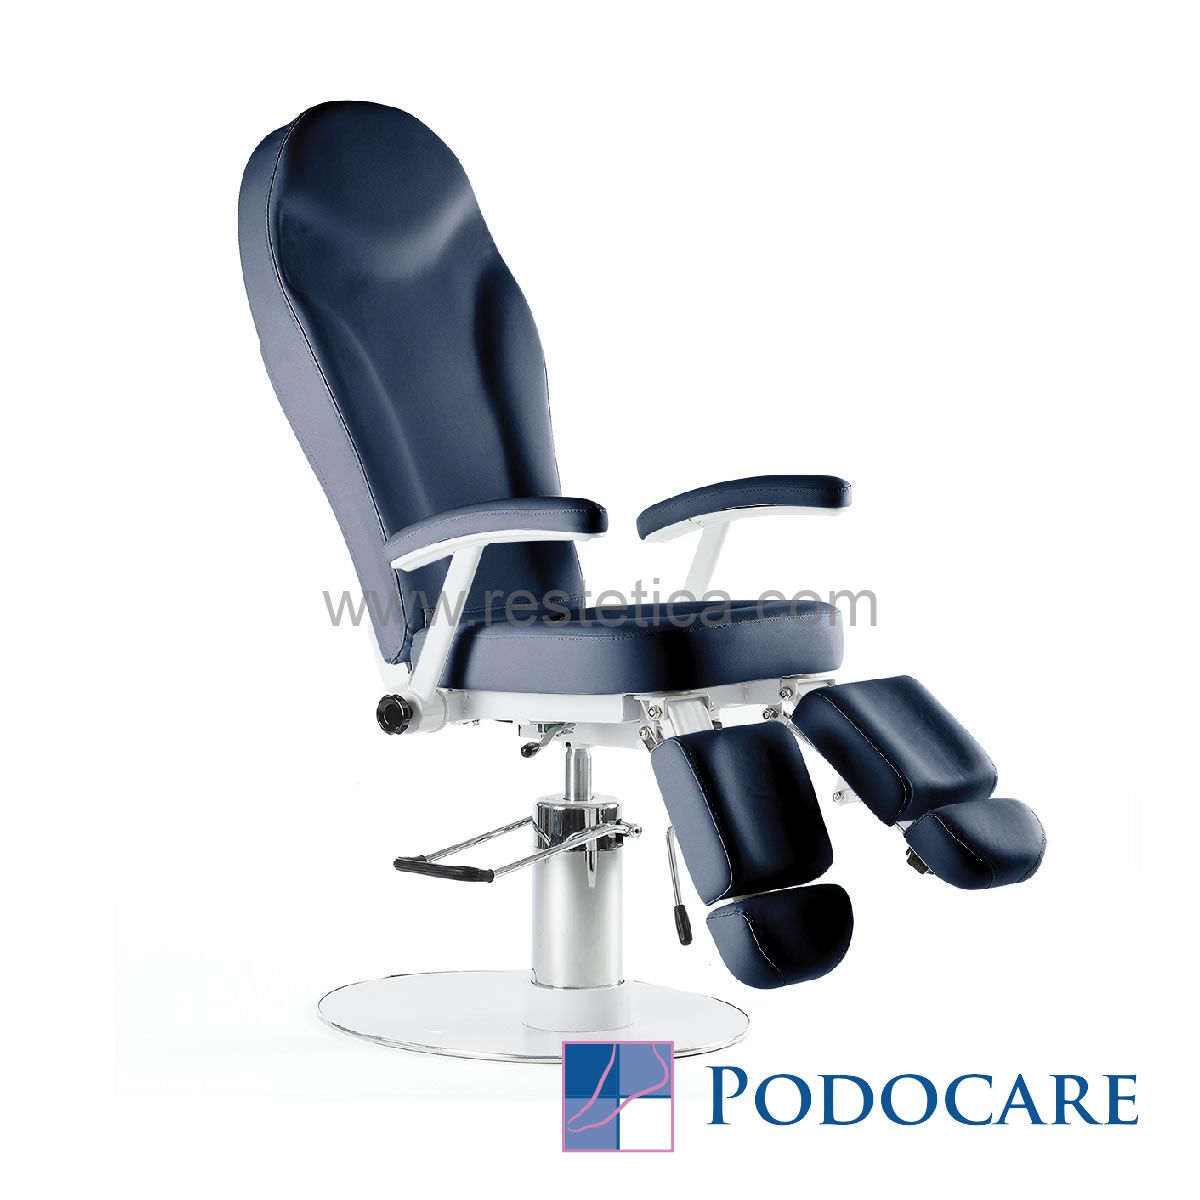 PODOCARE podiatry chair with hydraulic lift, ideal for pedicure treatments - Sku REHTP53